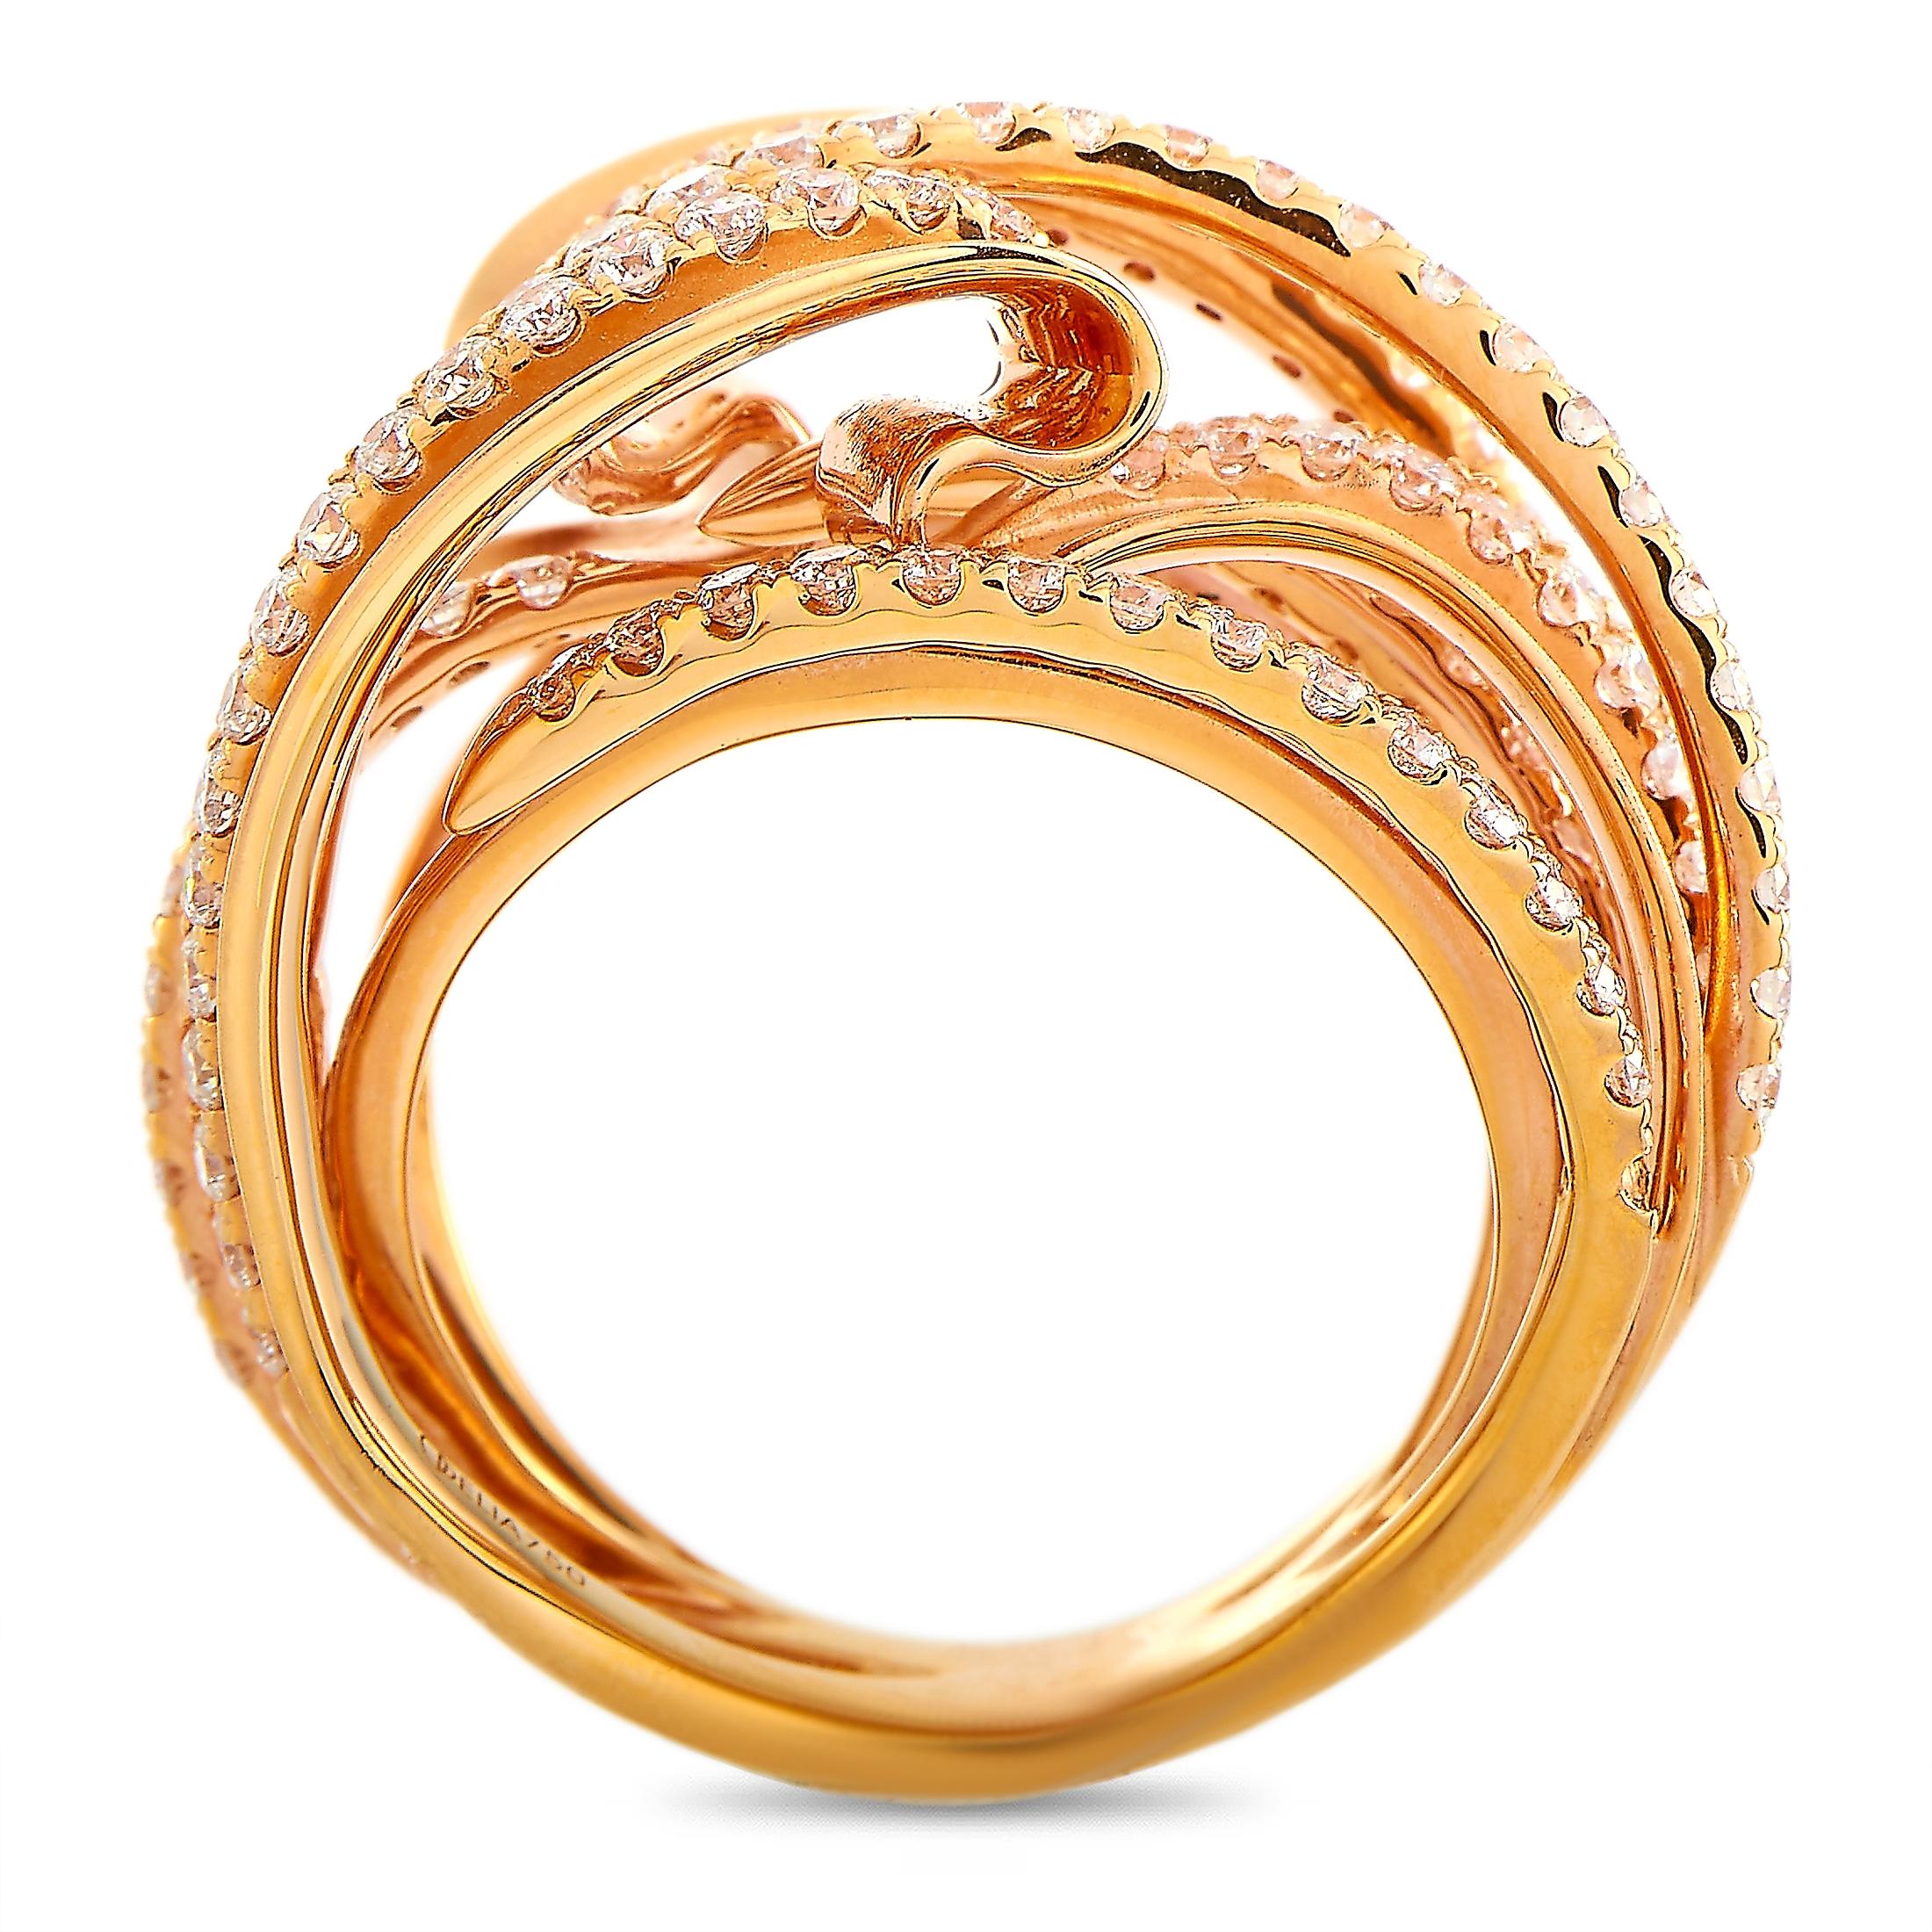 This LB Exclusive ring is made of 18K rose gold and embellished with diamonds that amount to 1.65 carats. The ring weighs 13.5 grams and boasts band thickness of 9 mm and top height of 7 mm, while top dimensions measure 19 by 20 mm.
 
 Offered in